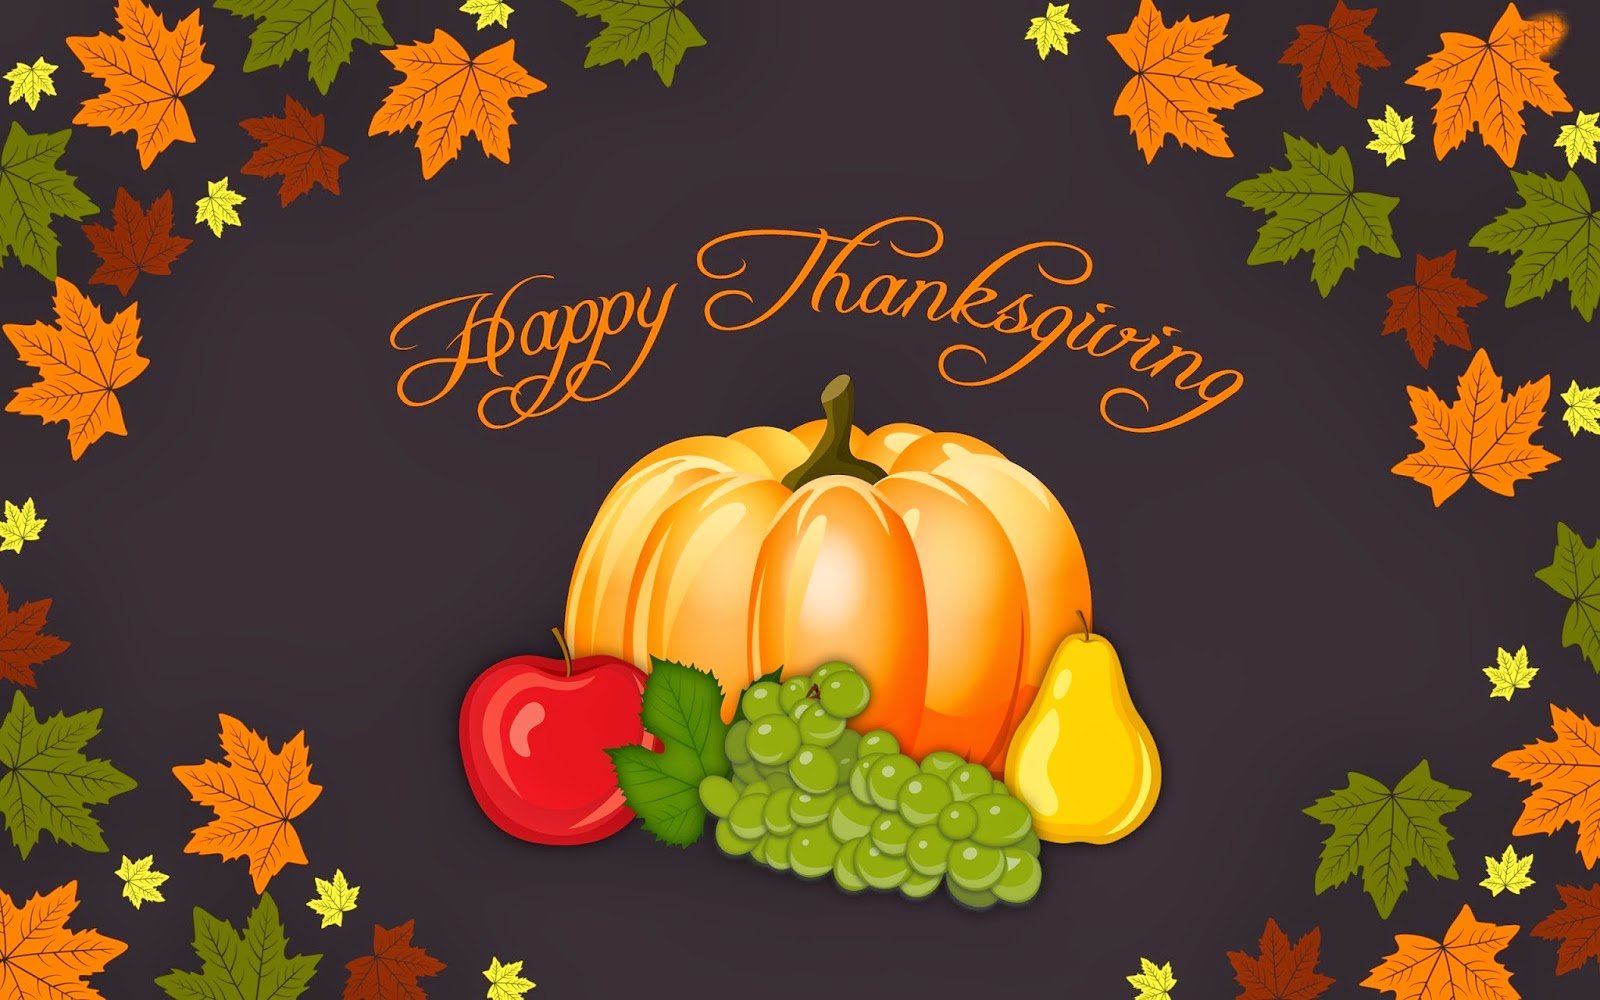  wallpaper for thanksgiving day funny thanksgiving day wishes wallpaper